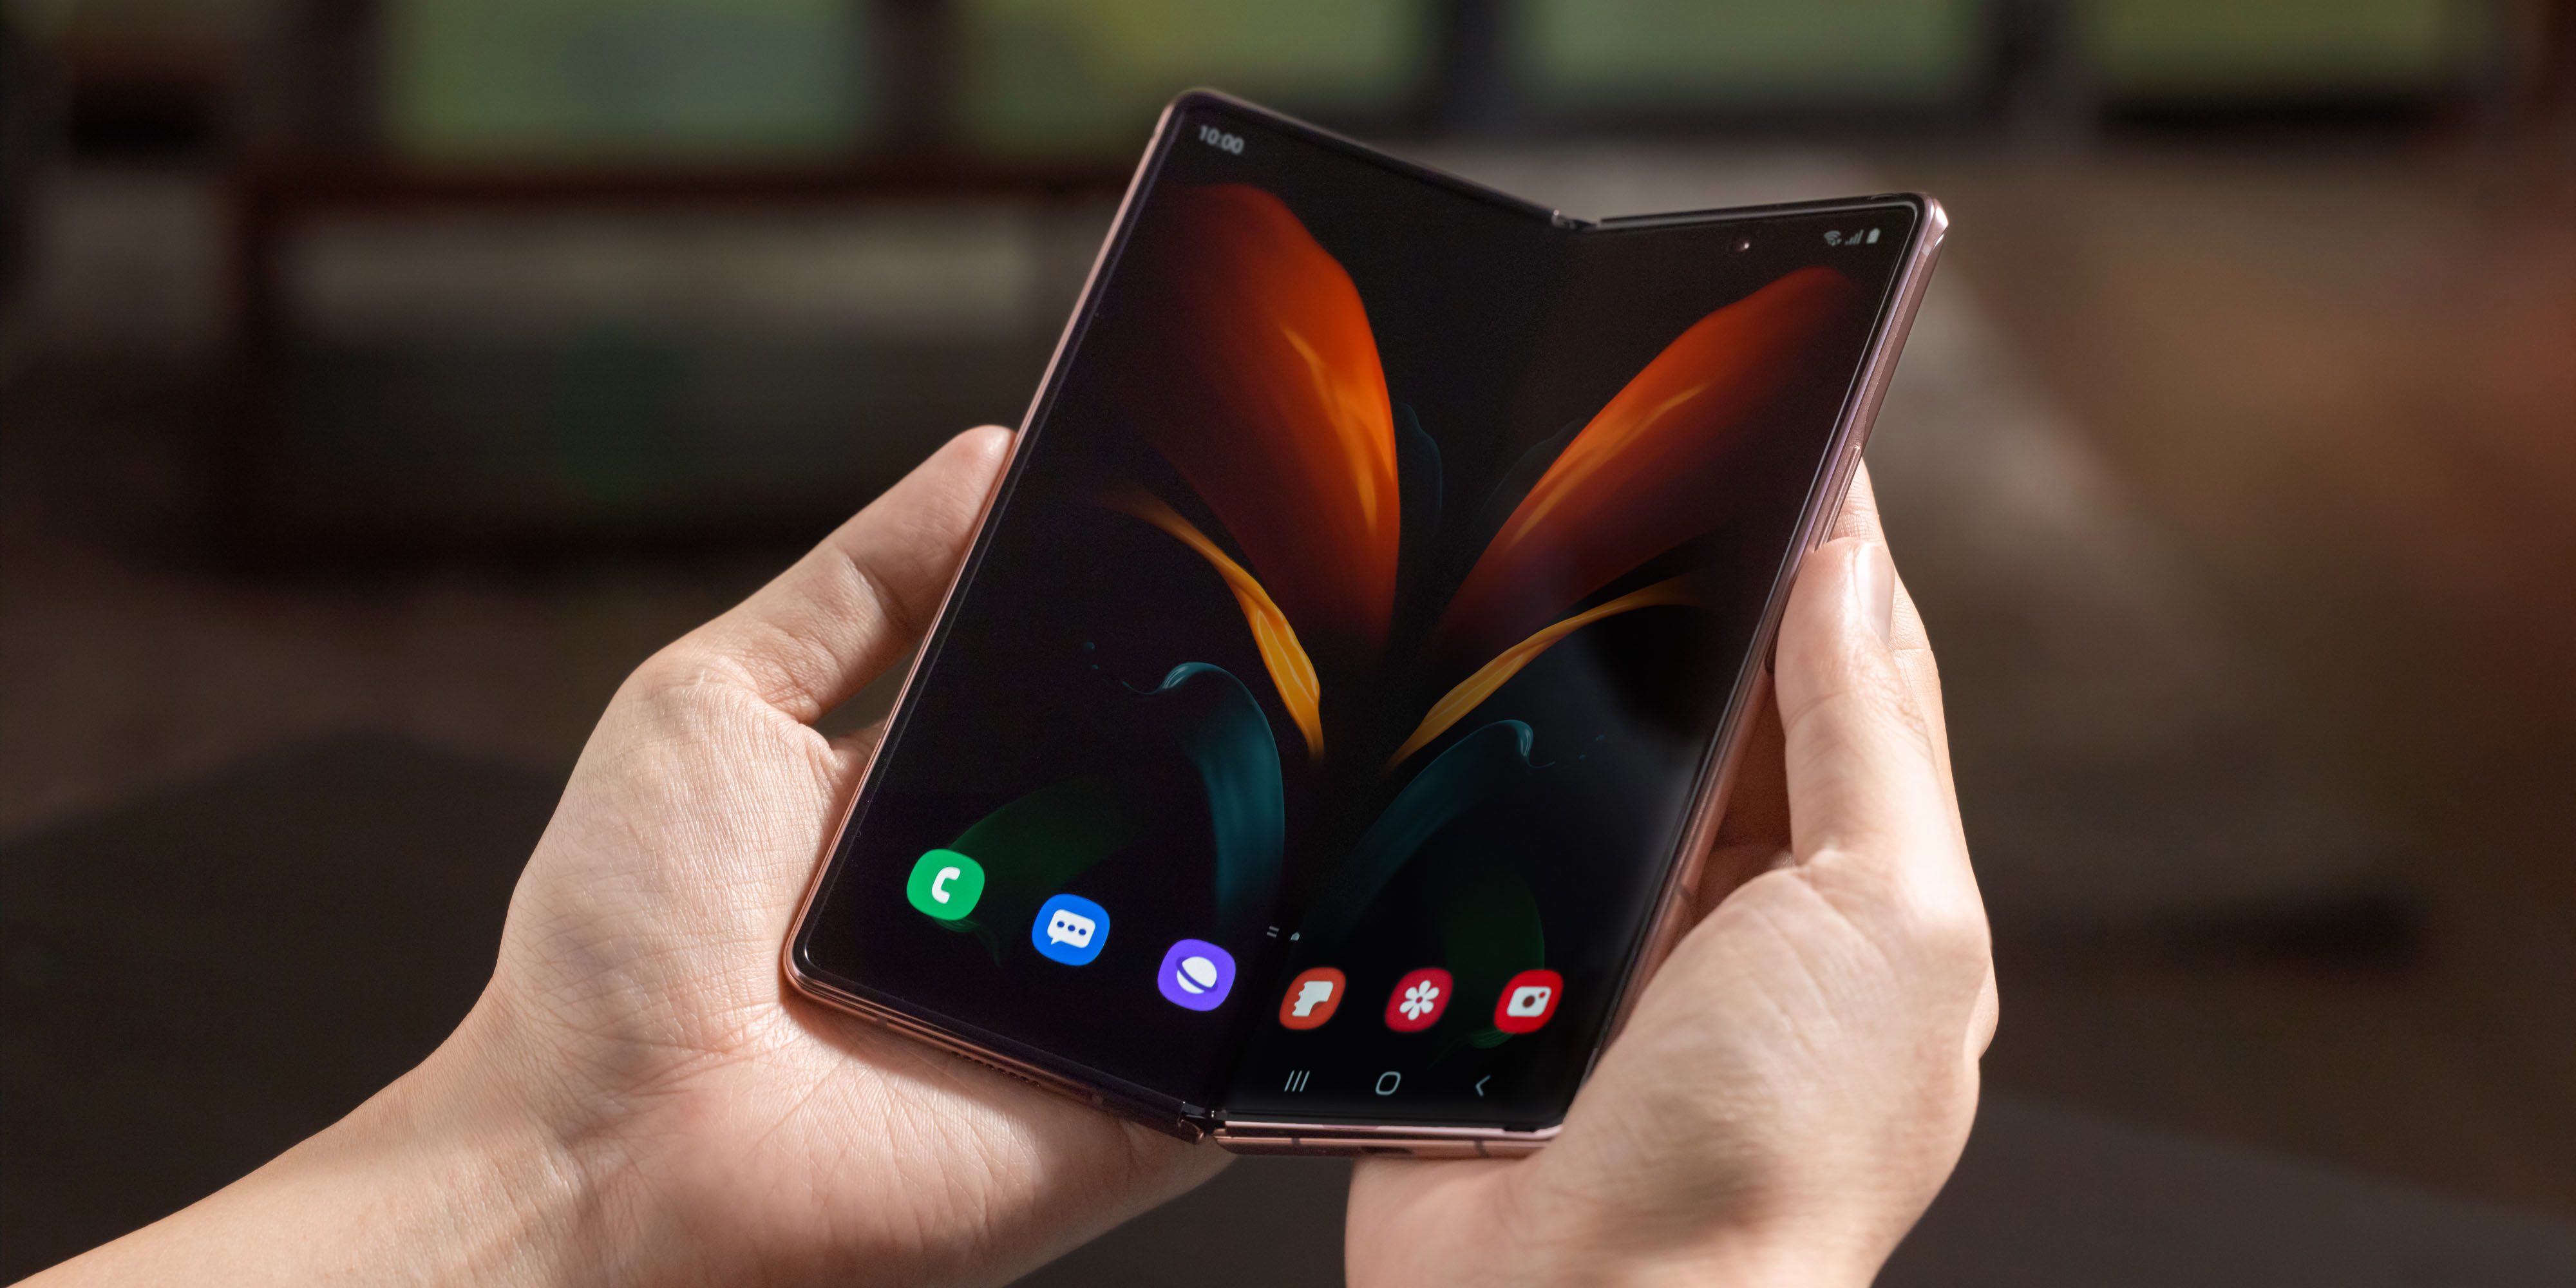 Samsung is rolling out One UI 3.1.1 update for foldable phones with older Z Fold and Z Flip